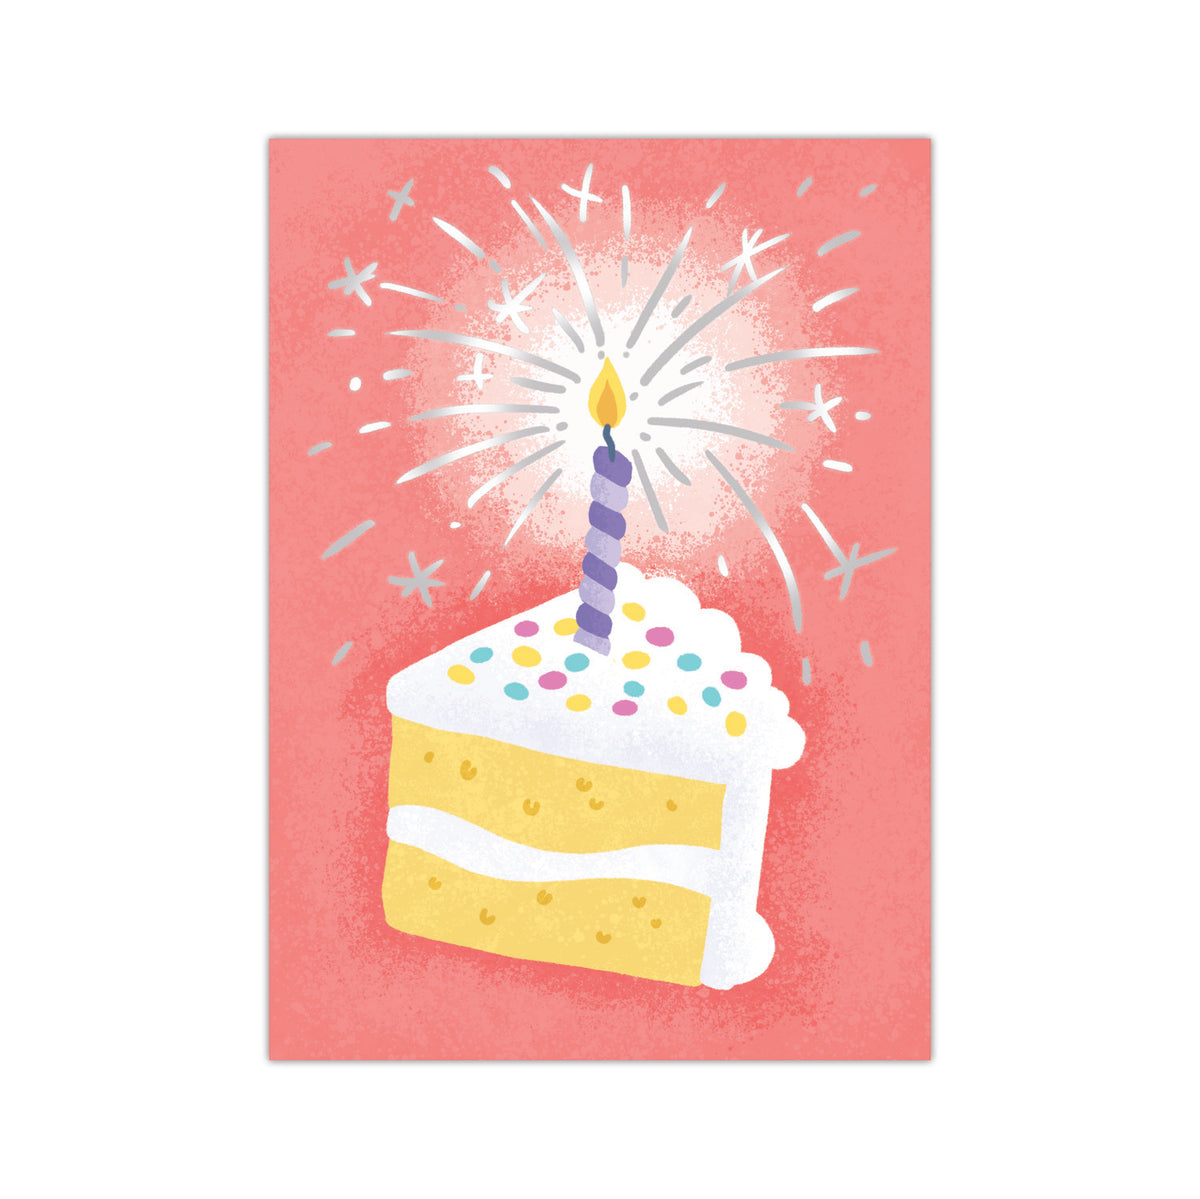 Glitter Candle in Slice of Cake Card Cover